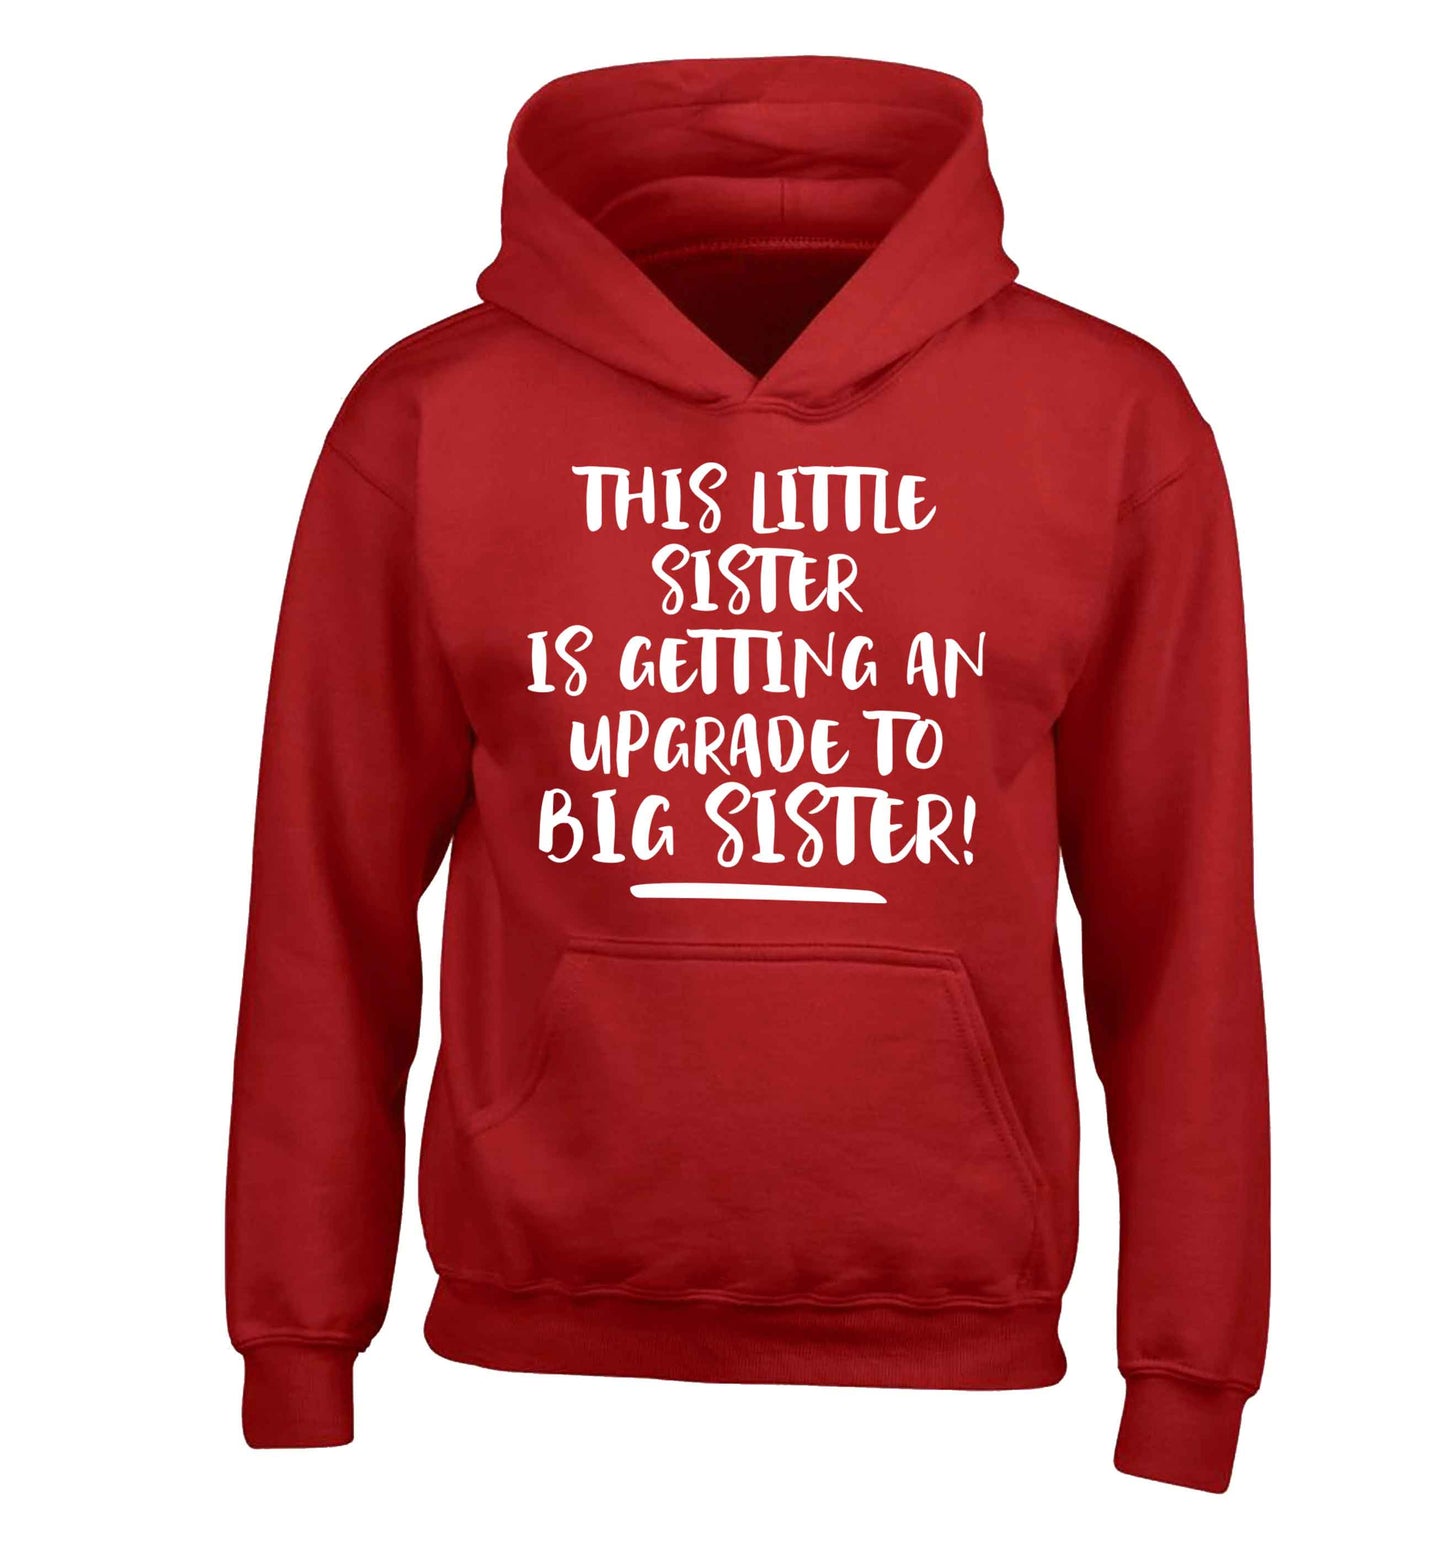 This little sister is getting an upgrade to big sister! children's red hoodie 12-13 Years